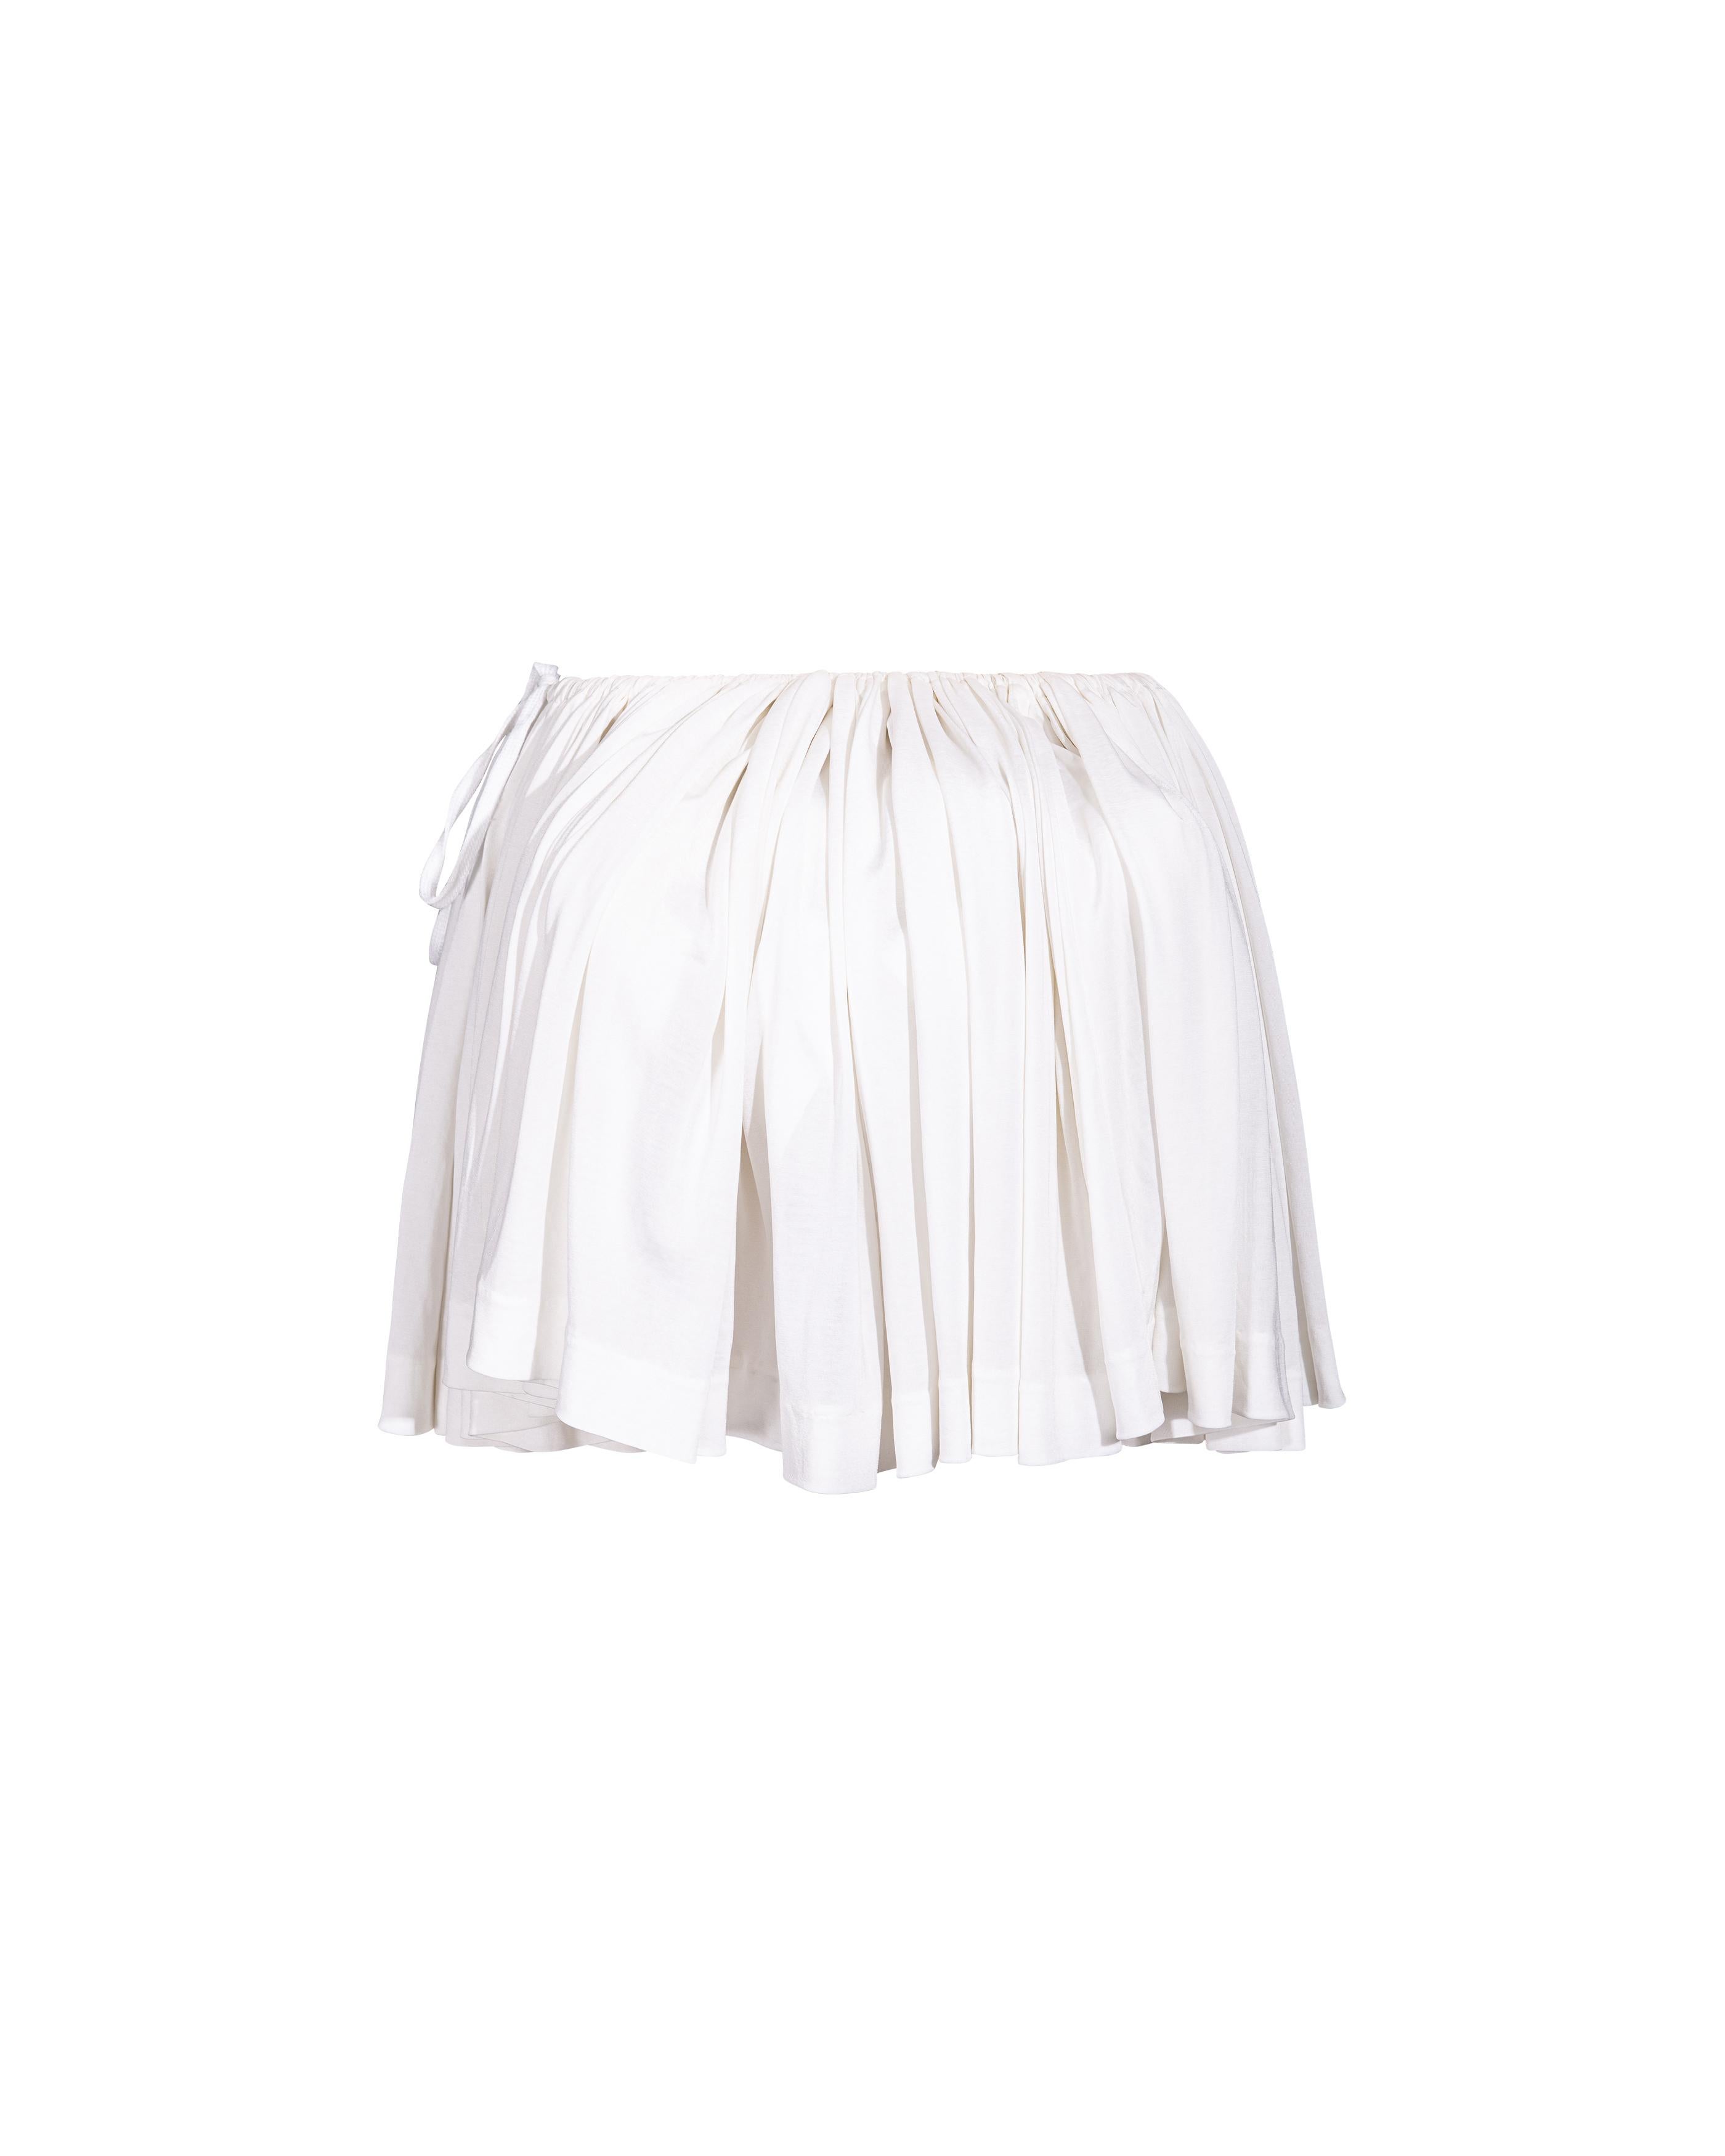 S/S 1988 Vivienne Westwood White Mini Skirt with Removable Bustle For Sale 1